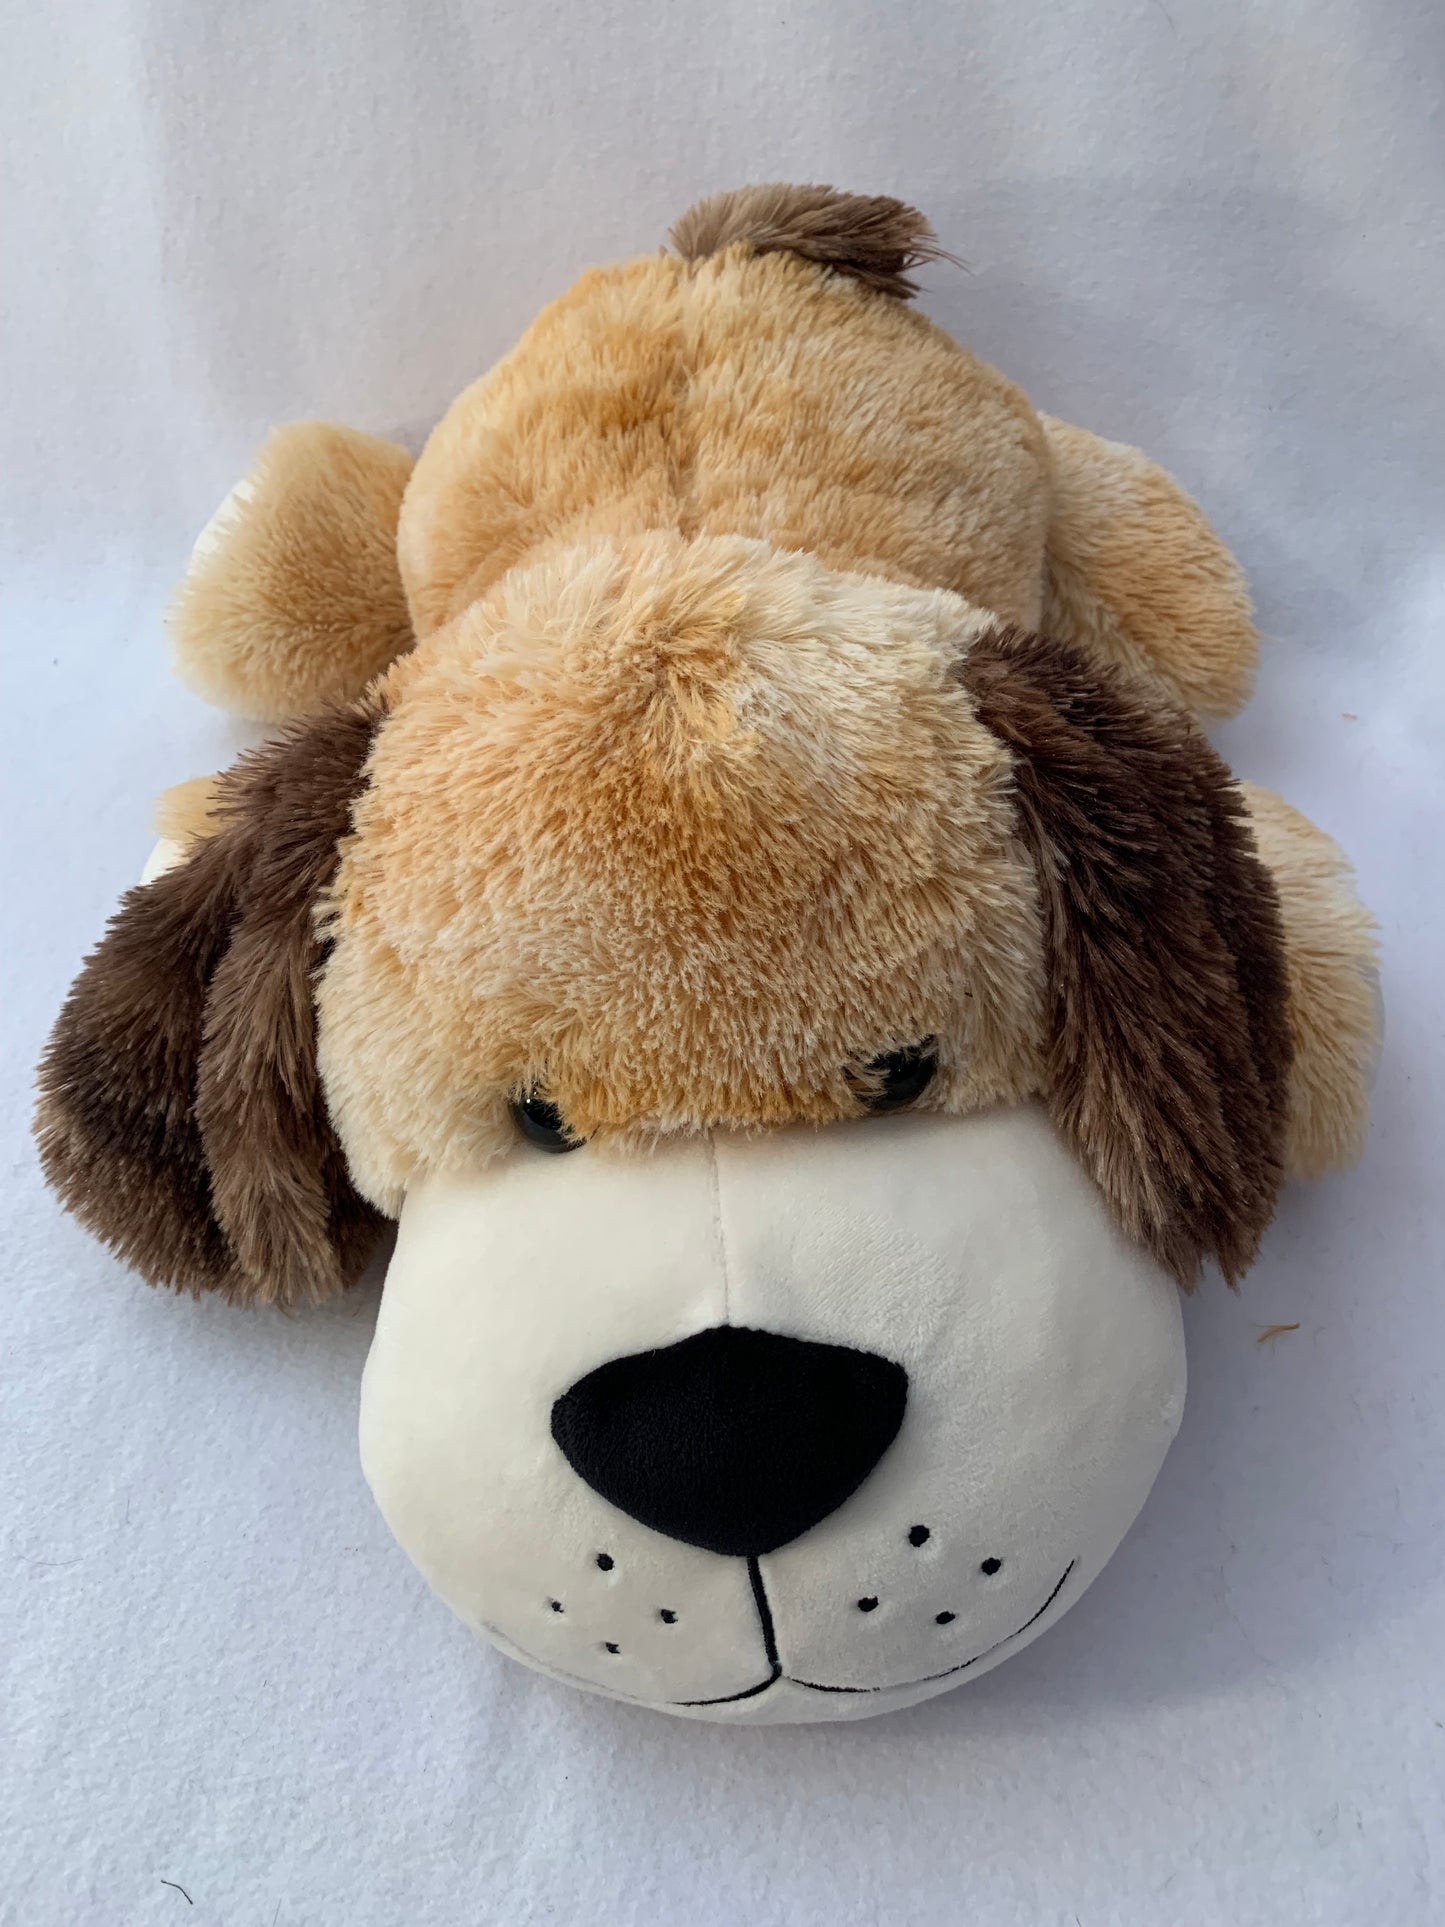 Weighted Plush Beagle Toy